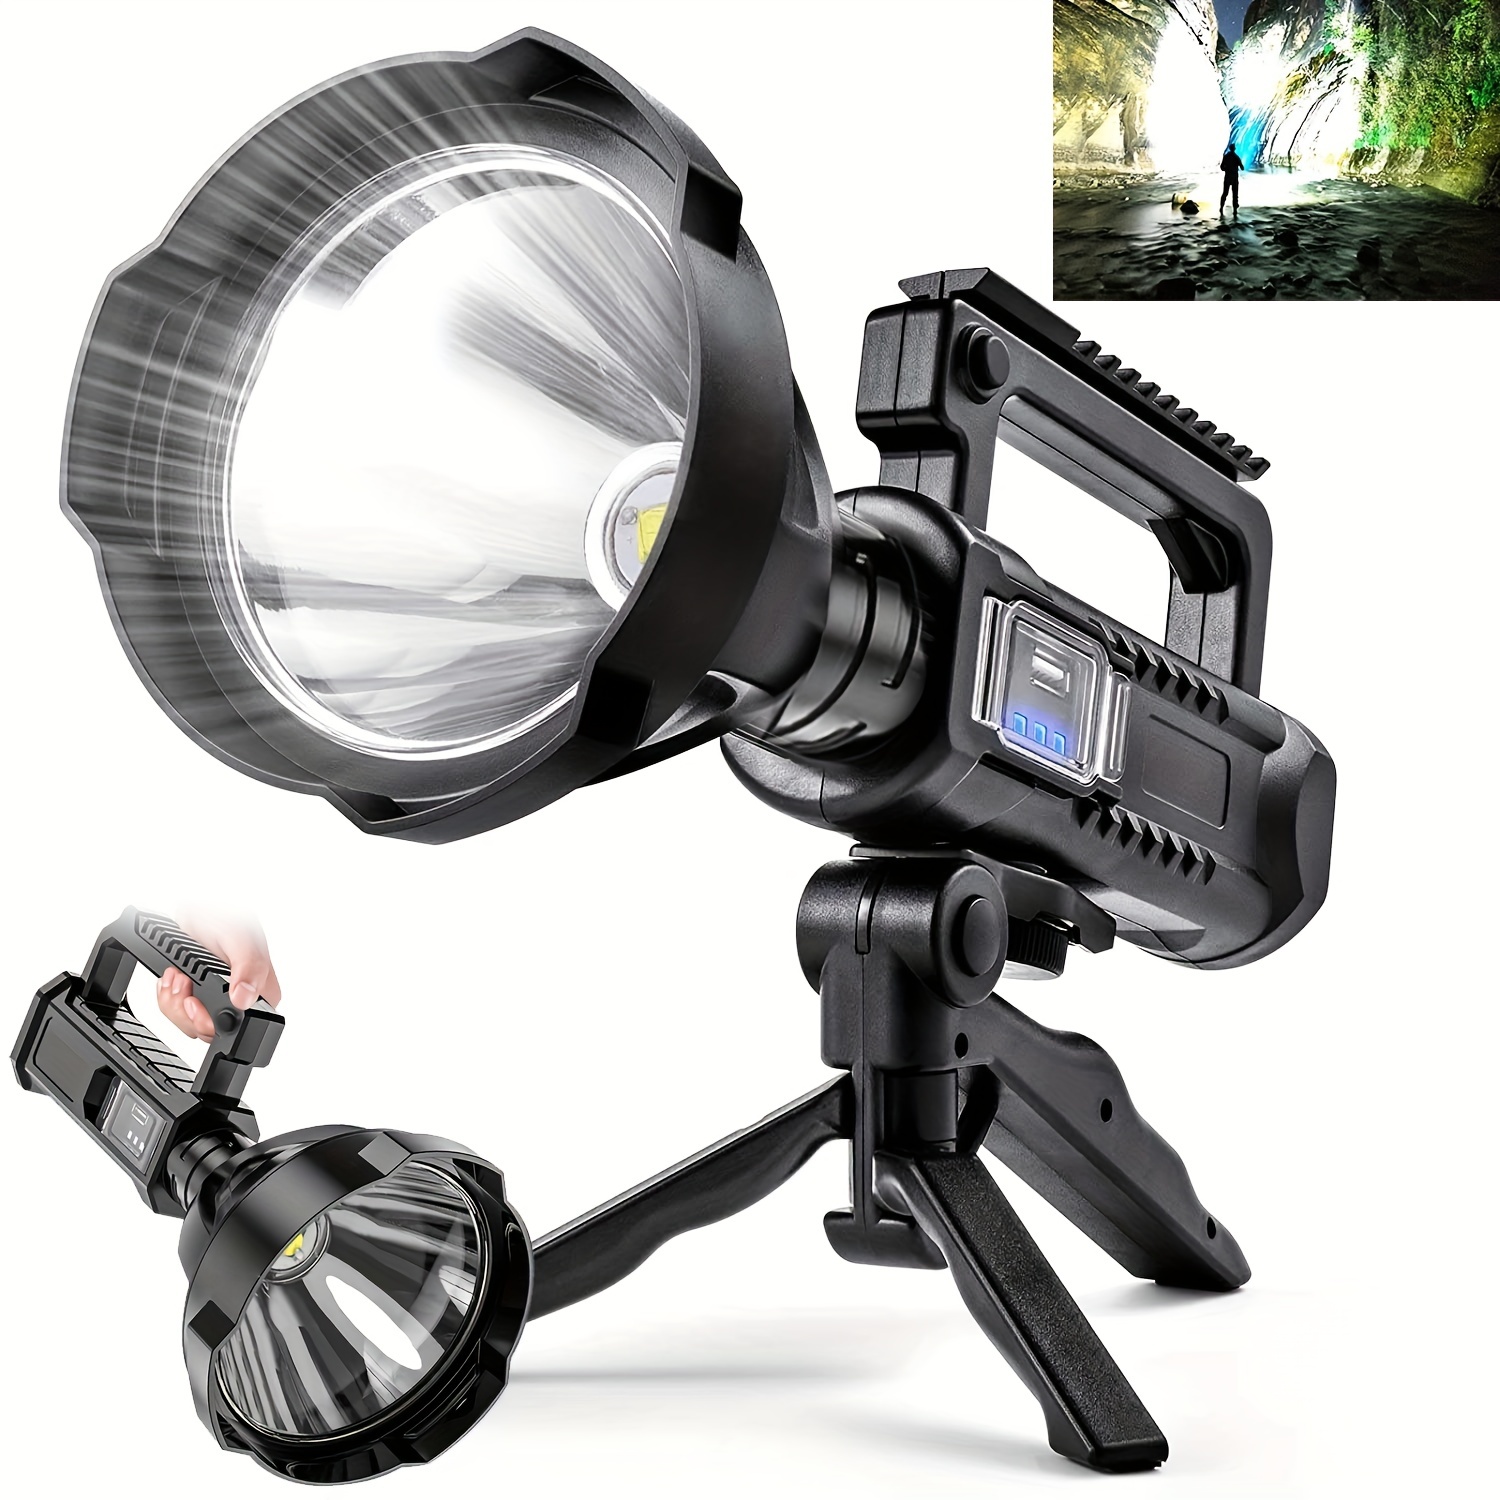 Get Rechargeable Flashlight With Tripod, 100,000 Lumens - Black